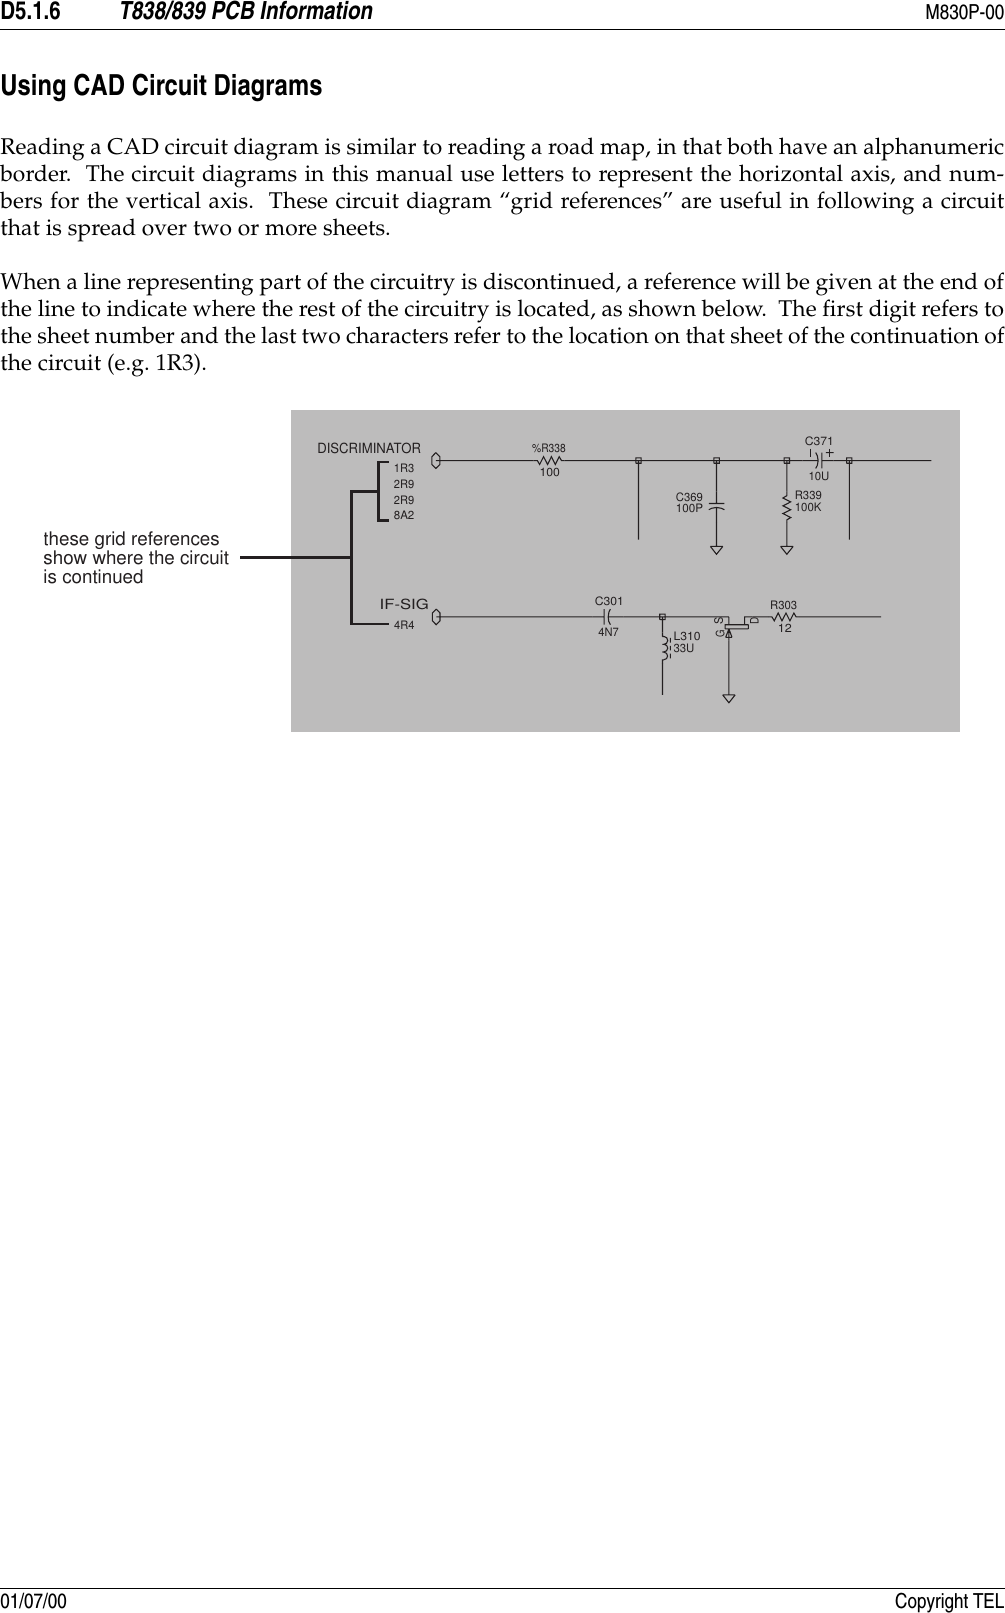 D5.1.6 T838/839 PCB Information M830P-0001/07/00 Copyright TELUsing CAD Circuit DiagramsReading a CAD circuit diagram is similar to reading a road map, in that both have an alphanumericborder.  The circuit diagrams in this manual use letters to represent the horizontal axis, and num-bers for the vertical axis.  These circuit diagram “grid references” are useful in following a circuitthat is spread over two or more sheets.When a line representing part of the circuitry is discontinued, a reference will be given at the end ofthe line to indicate where the rest of the circuitry is located, as shown below.  The first digit refers tothe sheet number and the last two characters refer to the location on that sheet of the continuation ofthe circuit (e.g. 1R3).C3014N7R30312DSGL31033UIF-SIG4R4C369100PC37110UR339100K%R338100DISCRIMINATOR1R32R92R98A2these grid referencesshow where the circuitis continued